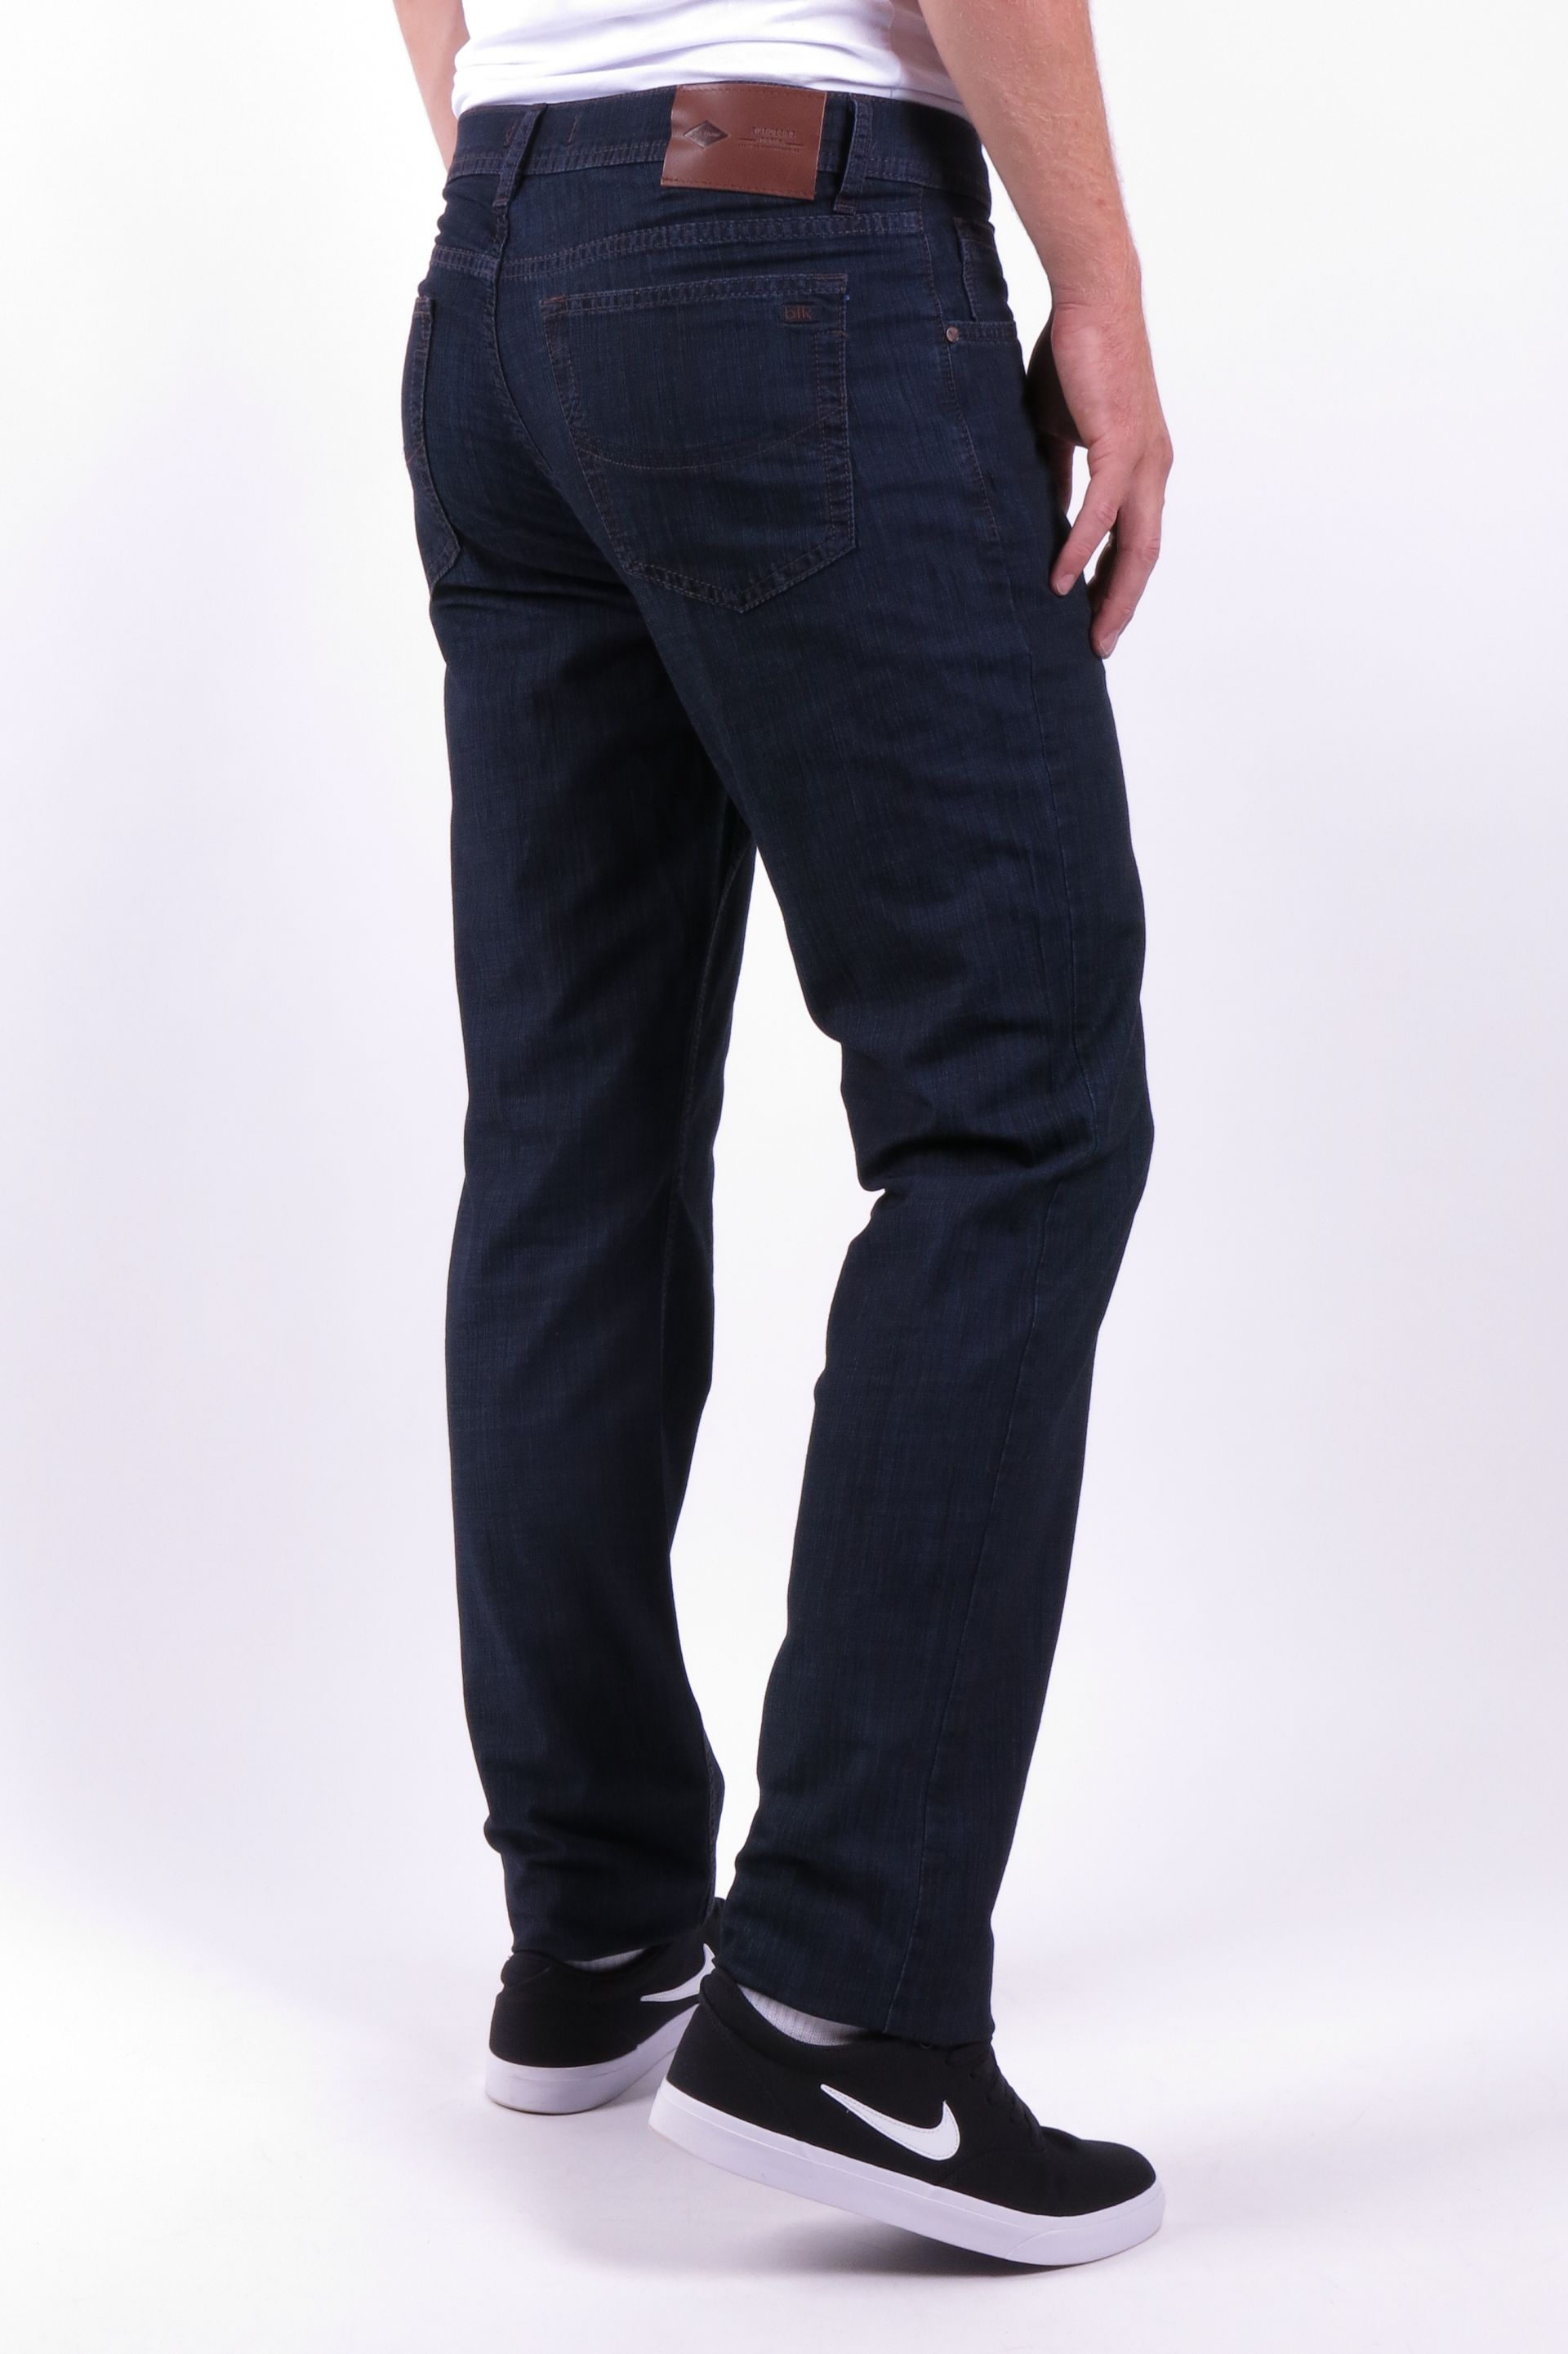 Chino pants BLK JEANS 7898-821-302-253